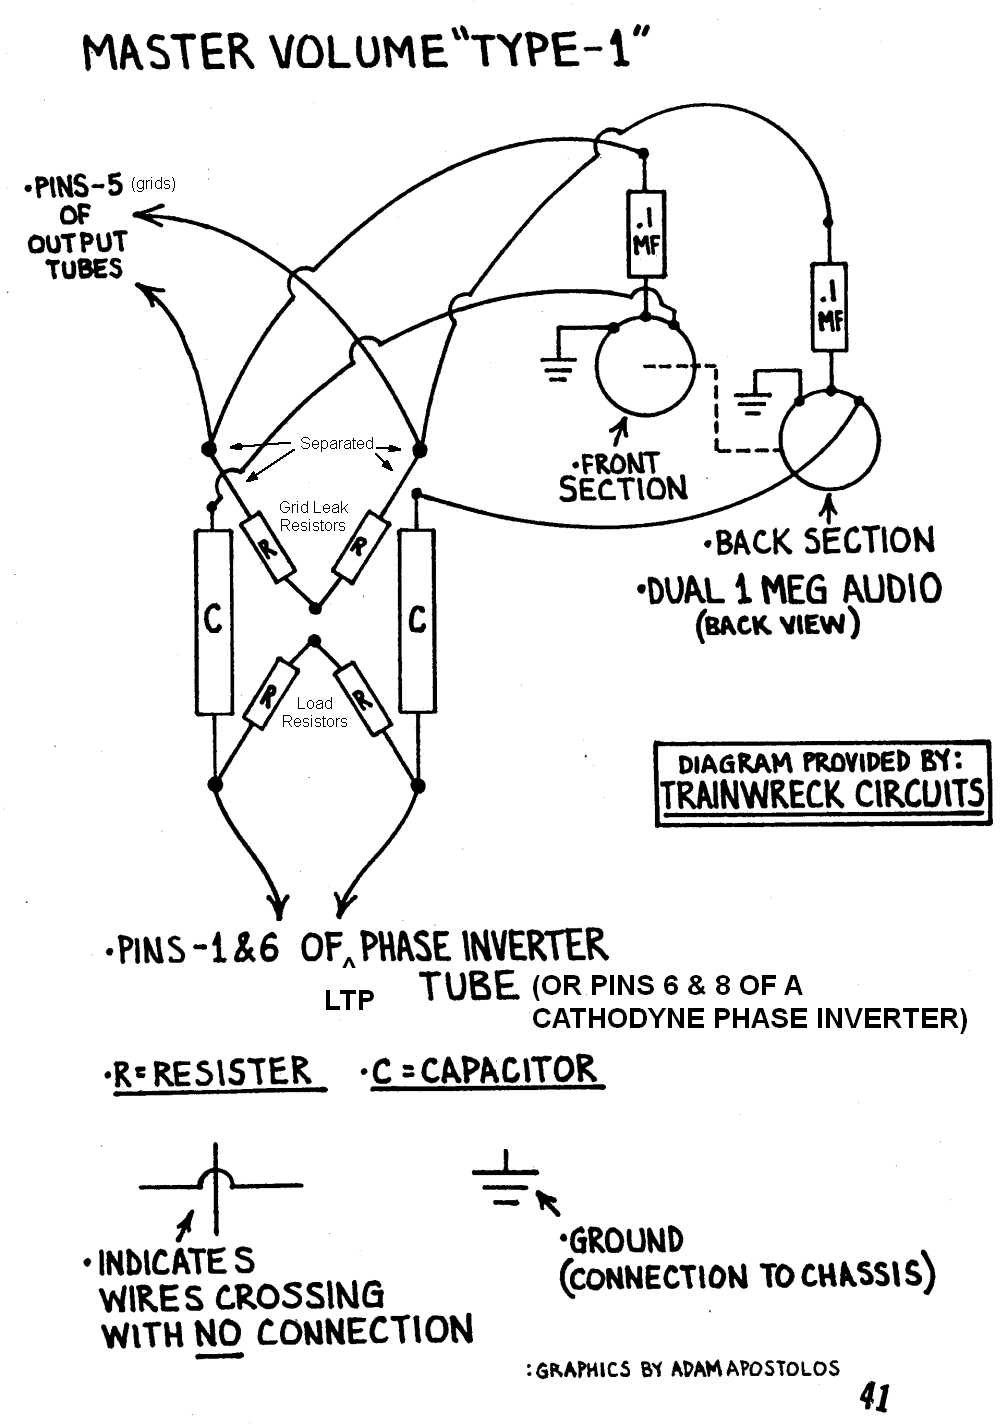 Trainwreck Pages wiring a 2 gang schematic diagram 